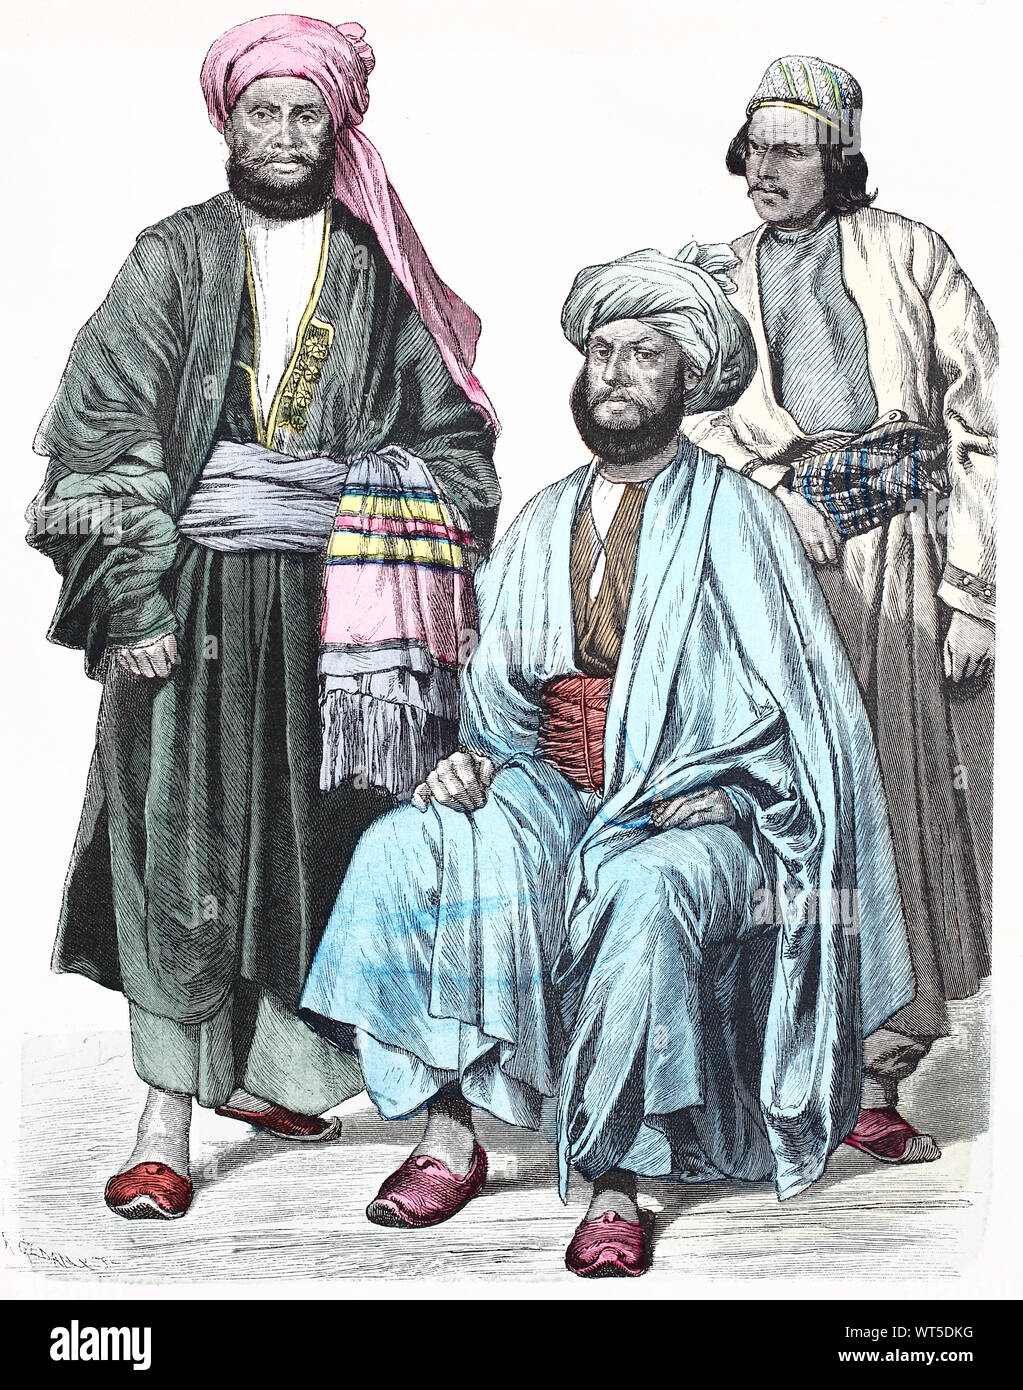 National costume, clothes, history of the costumes, Afghan, national costumes from Asia, in 1885, Volkstracht, Kleidung, Geschichte der Kostüme, Afghanen, Trachten aus Asien, 1885 Stock Photo